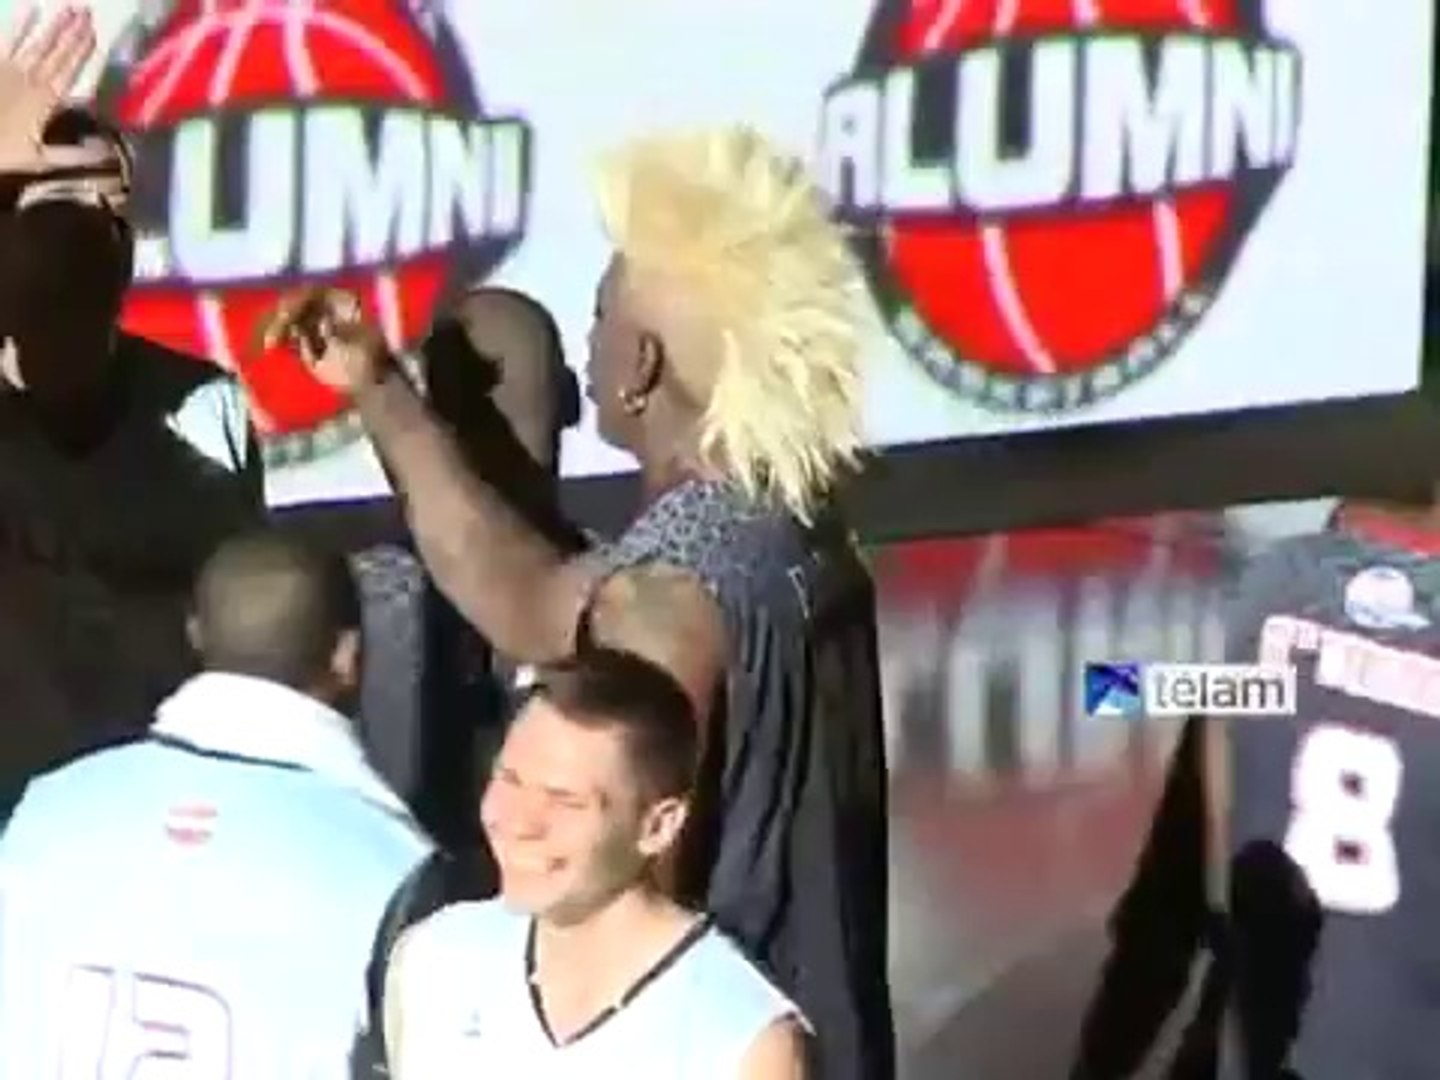 Only Dennis Rodman can play basketball in full drag regalia